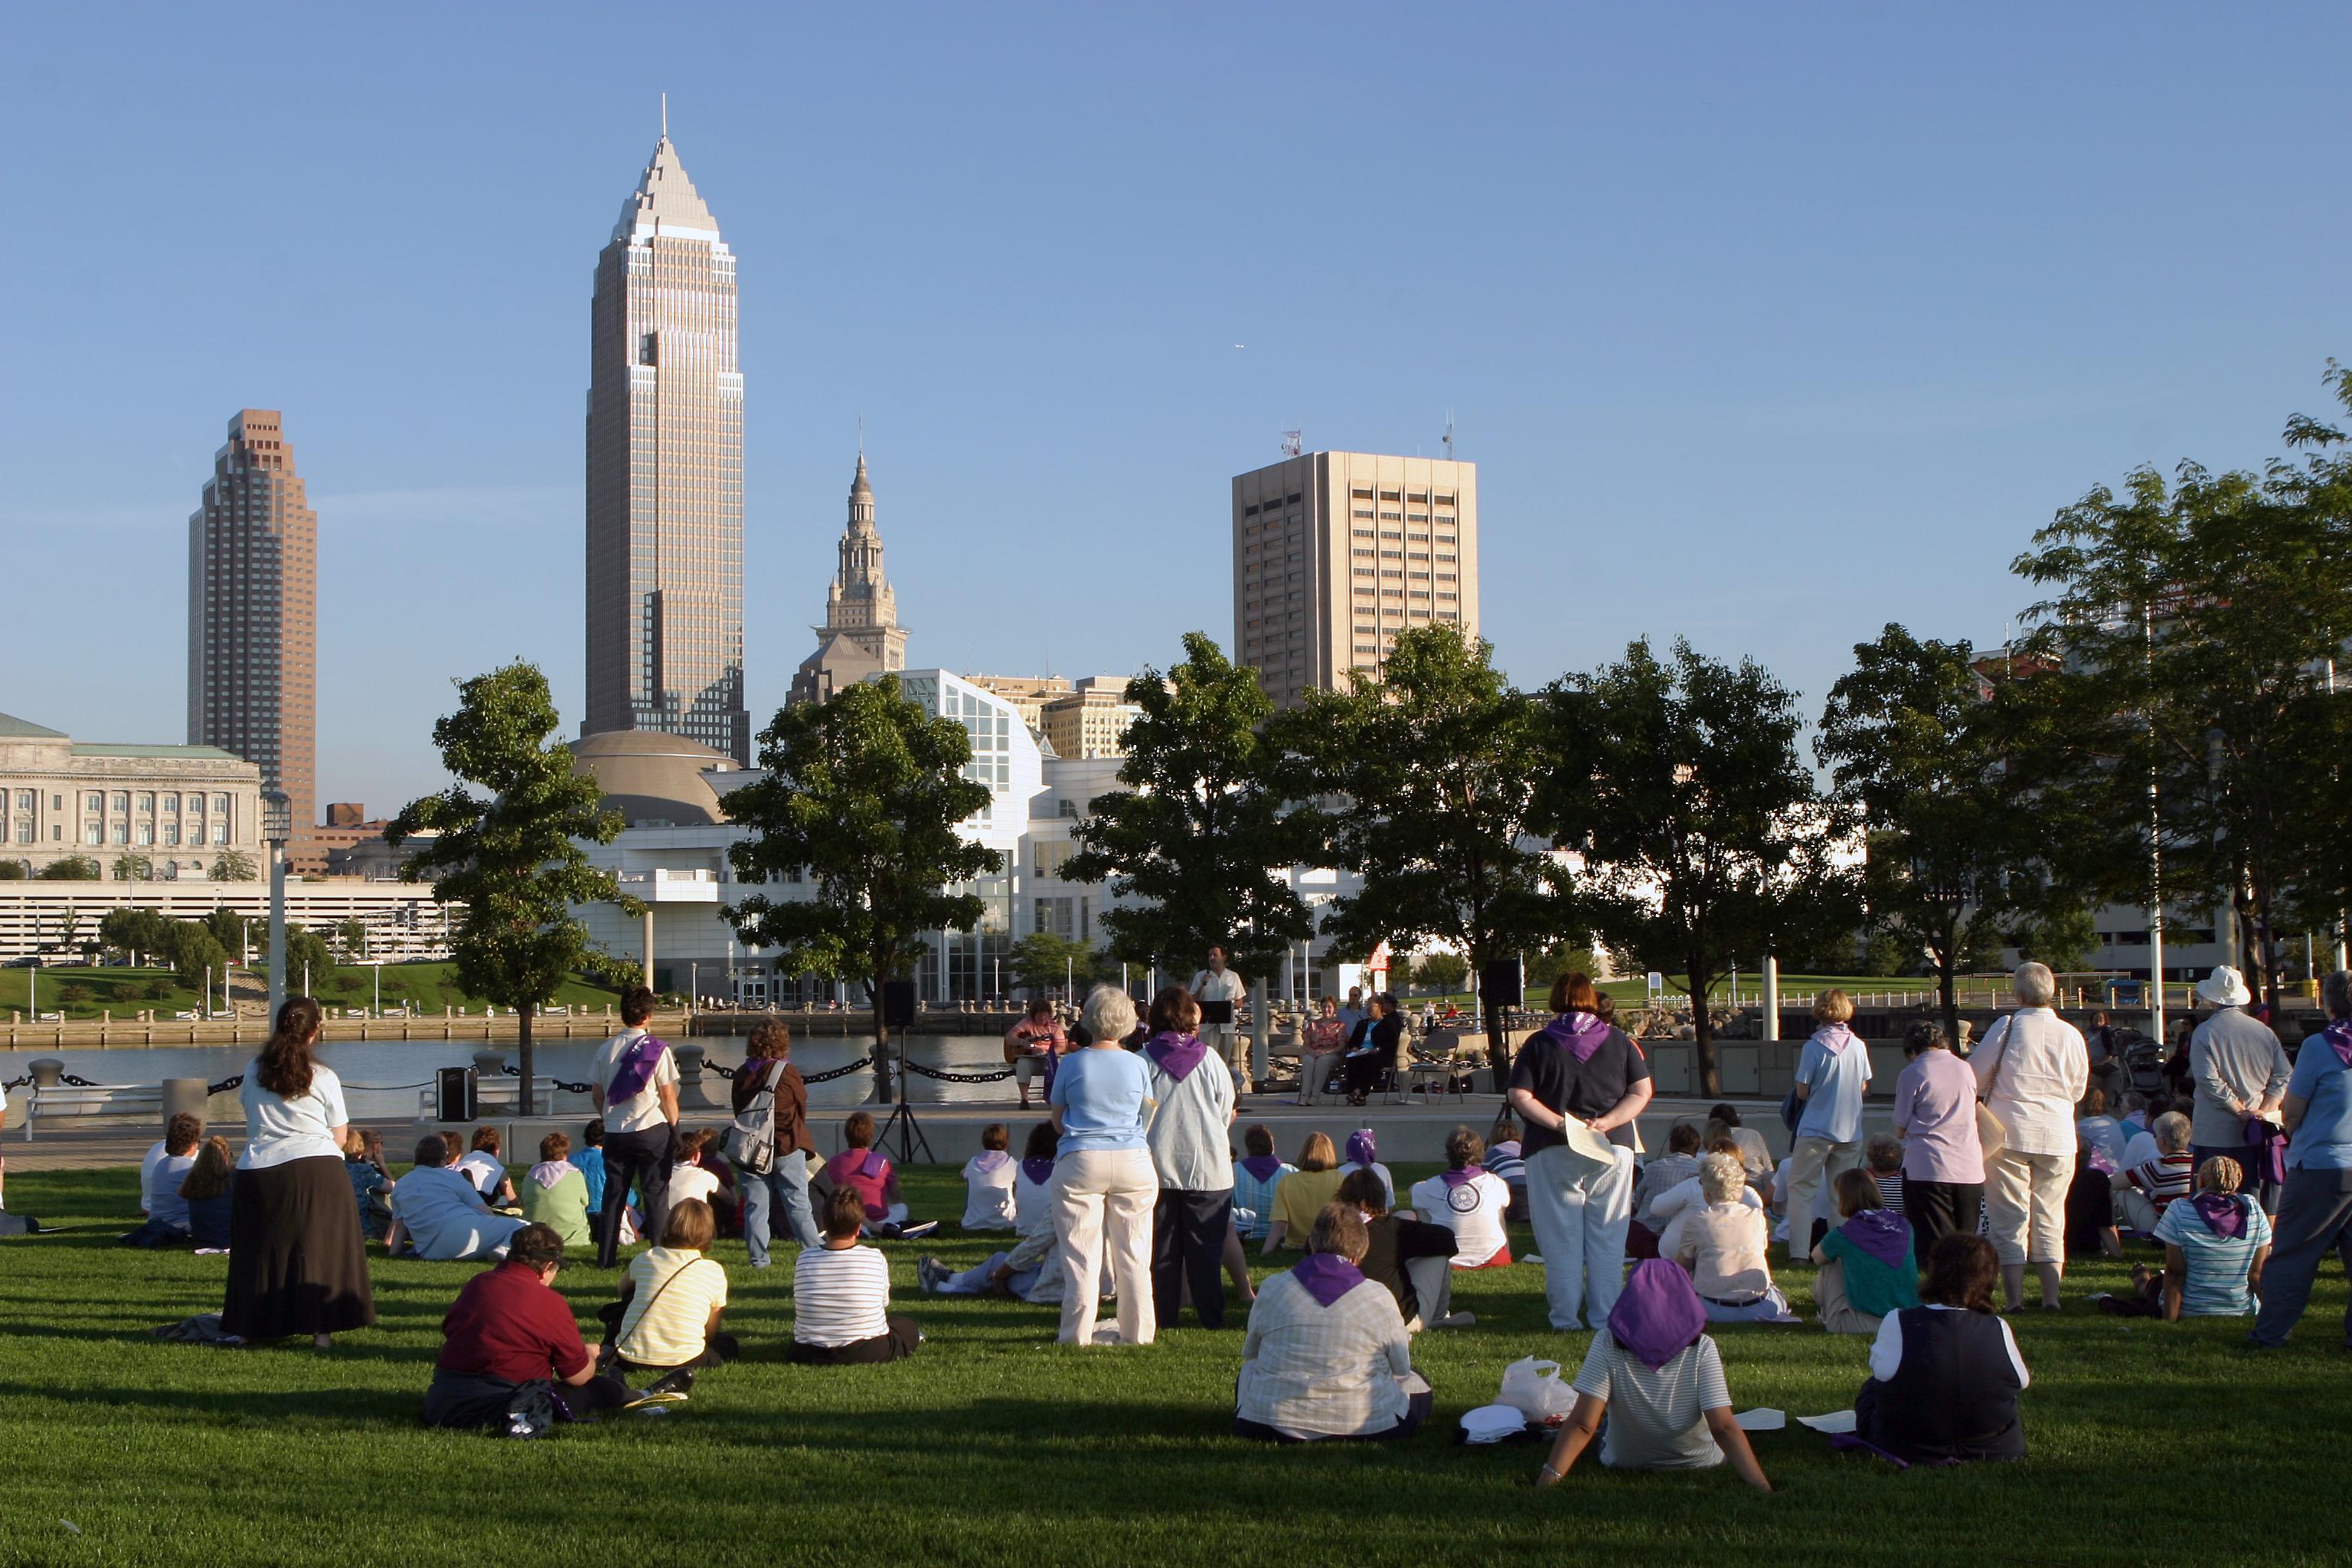 A skyline view of the city of Cleveland